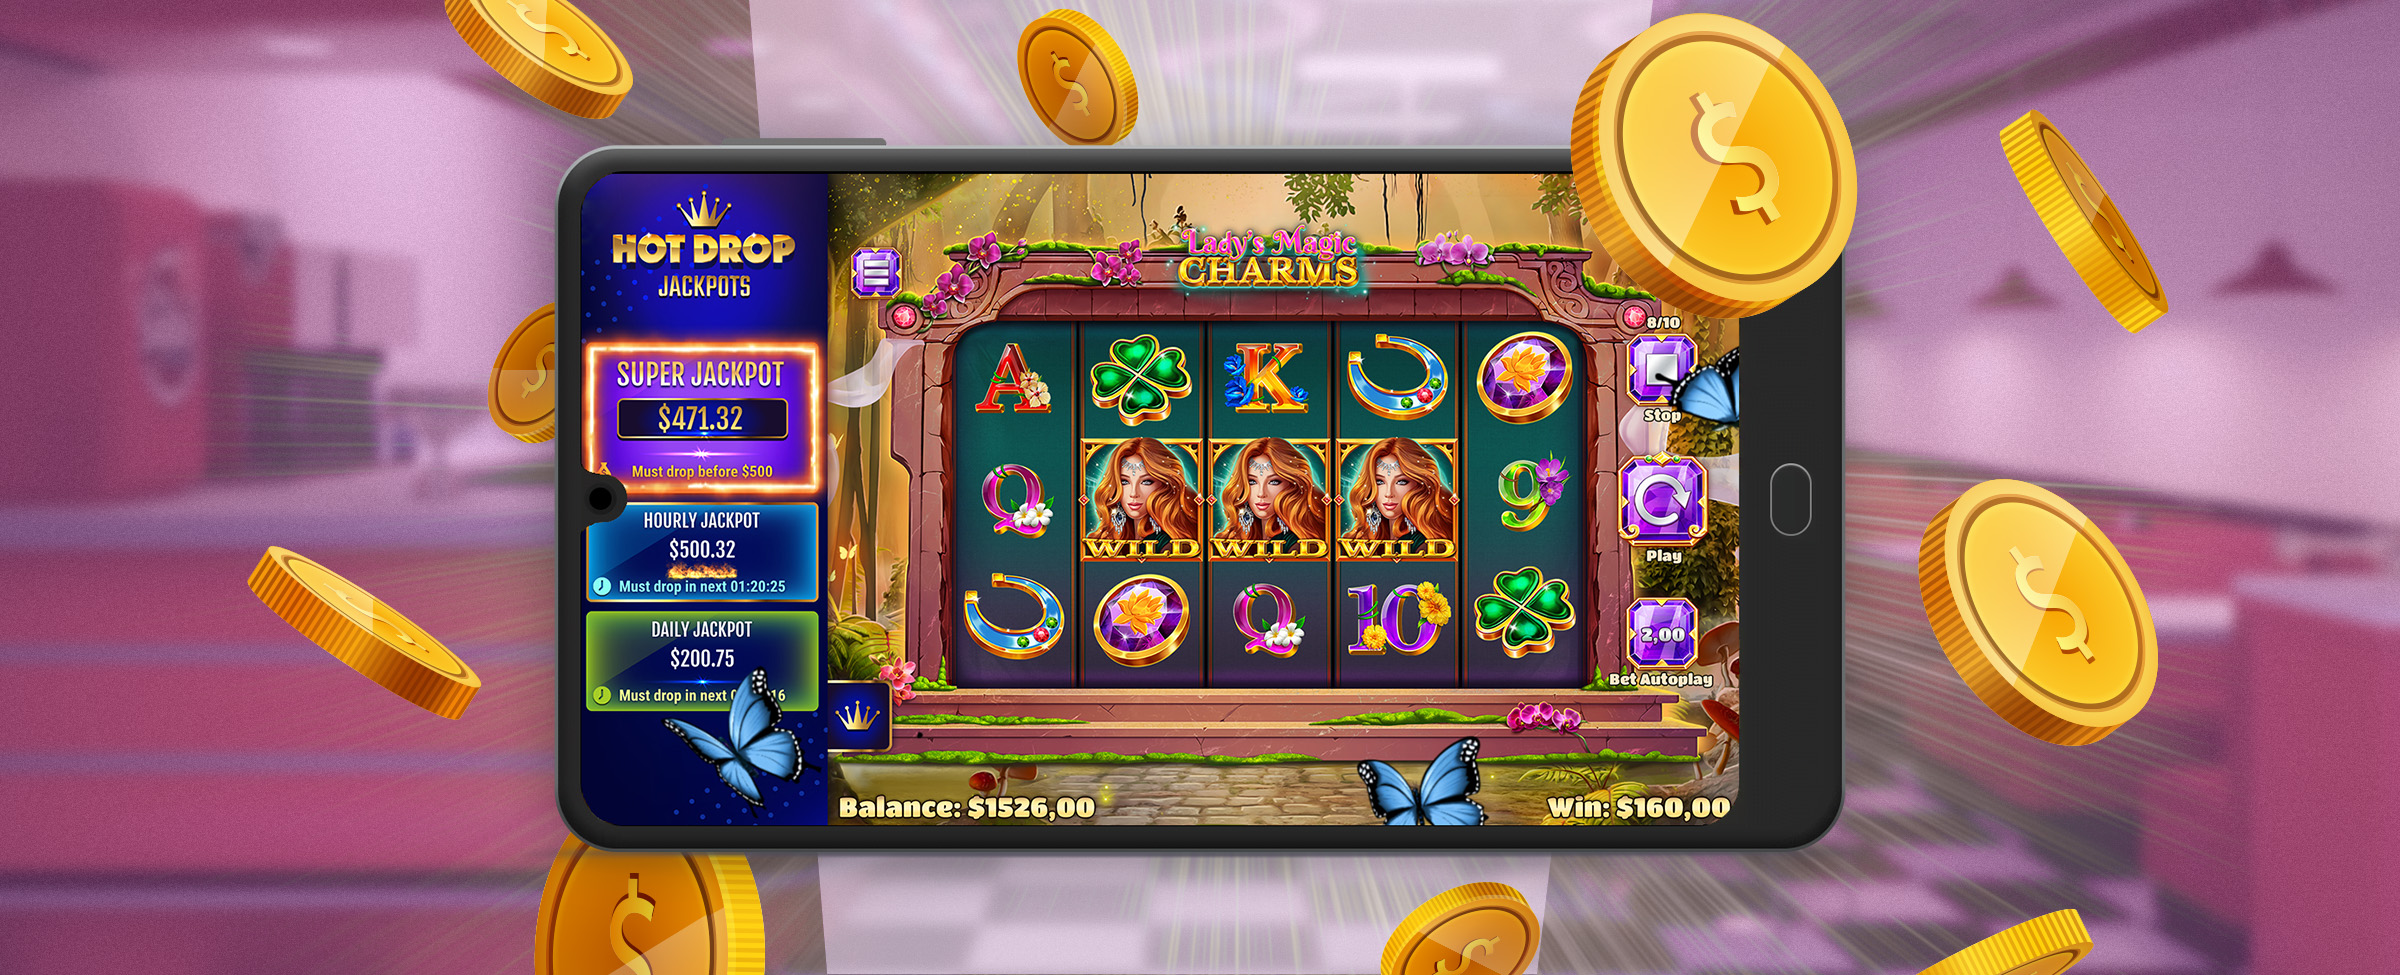 A mobile phone showing a screenshot of the Cafe Casino Lady’s Lucky Charms slot game with gold coins orbiting the phone, against an out of focus 50s diner.